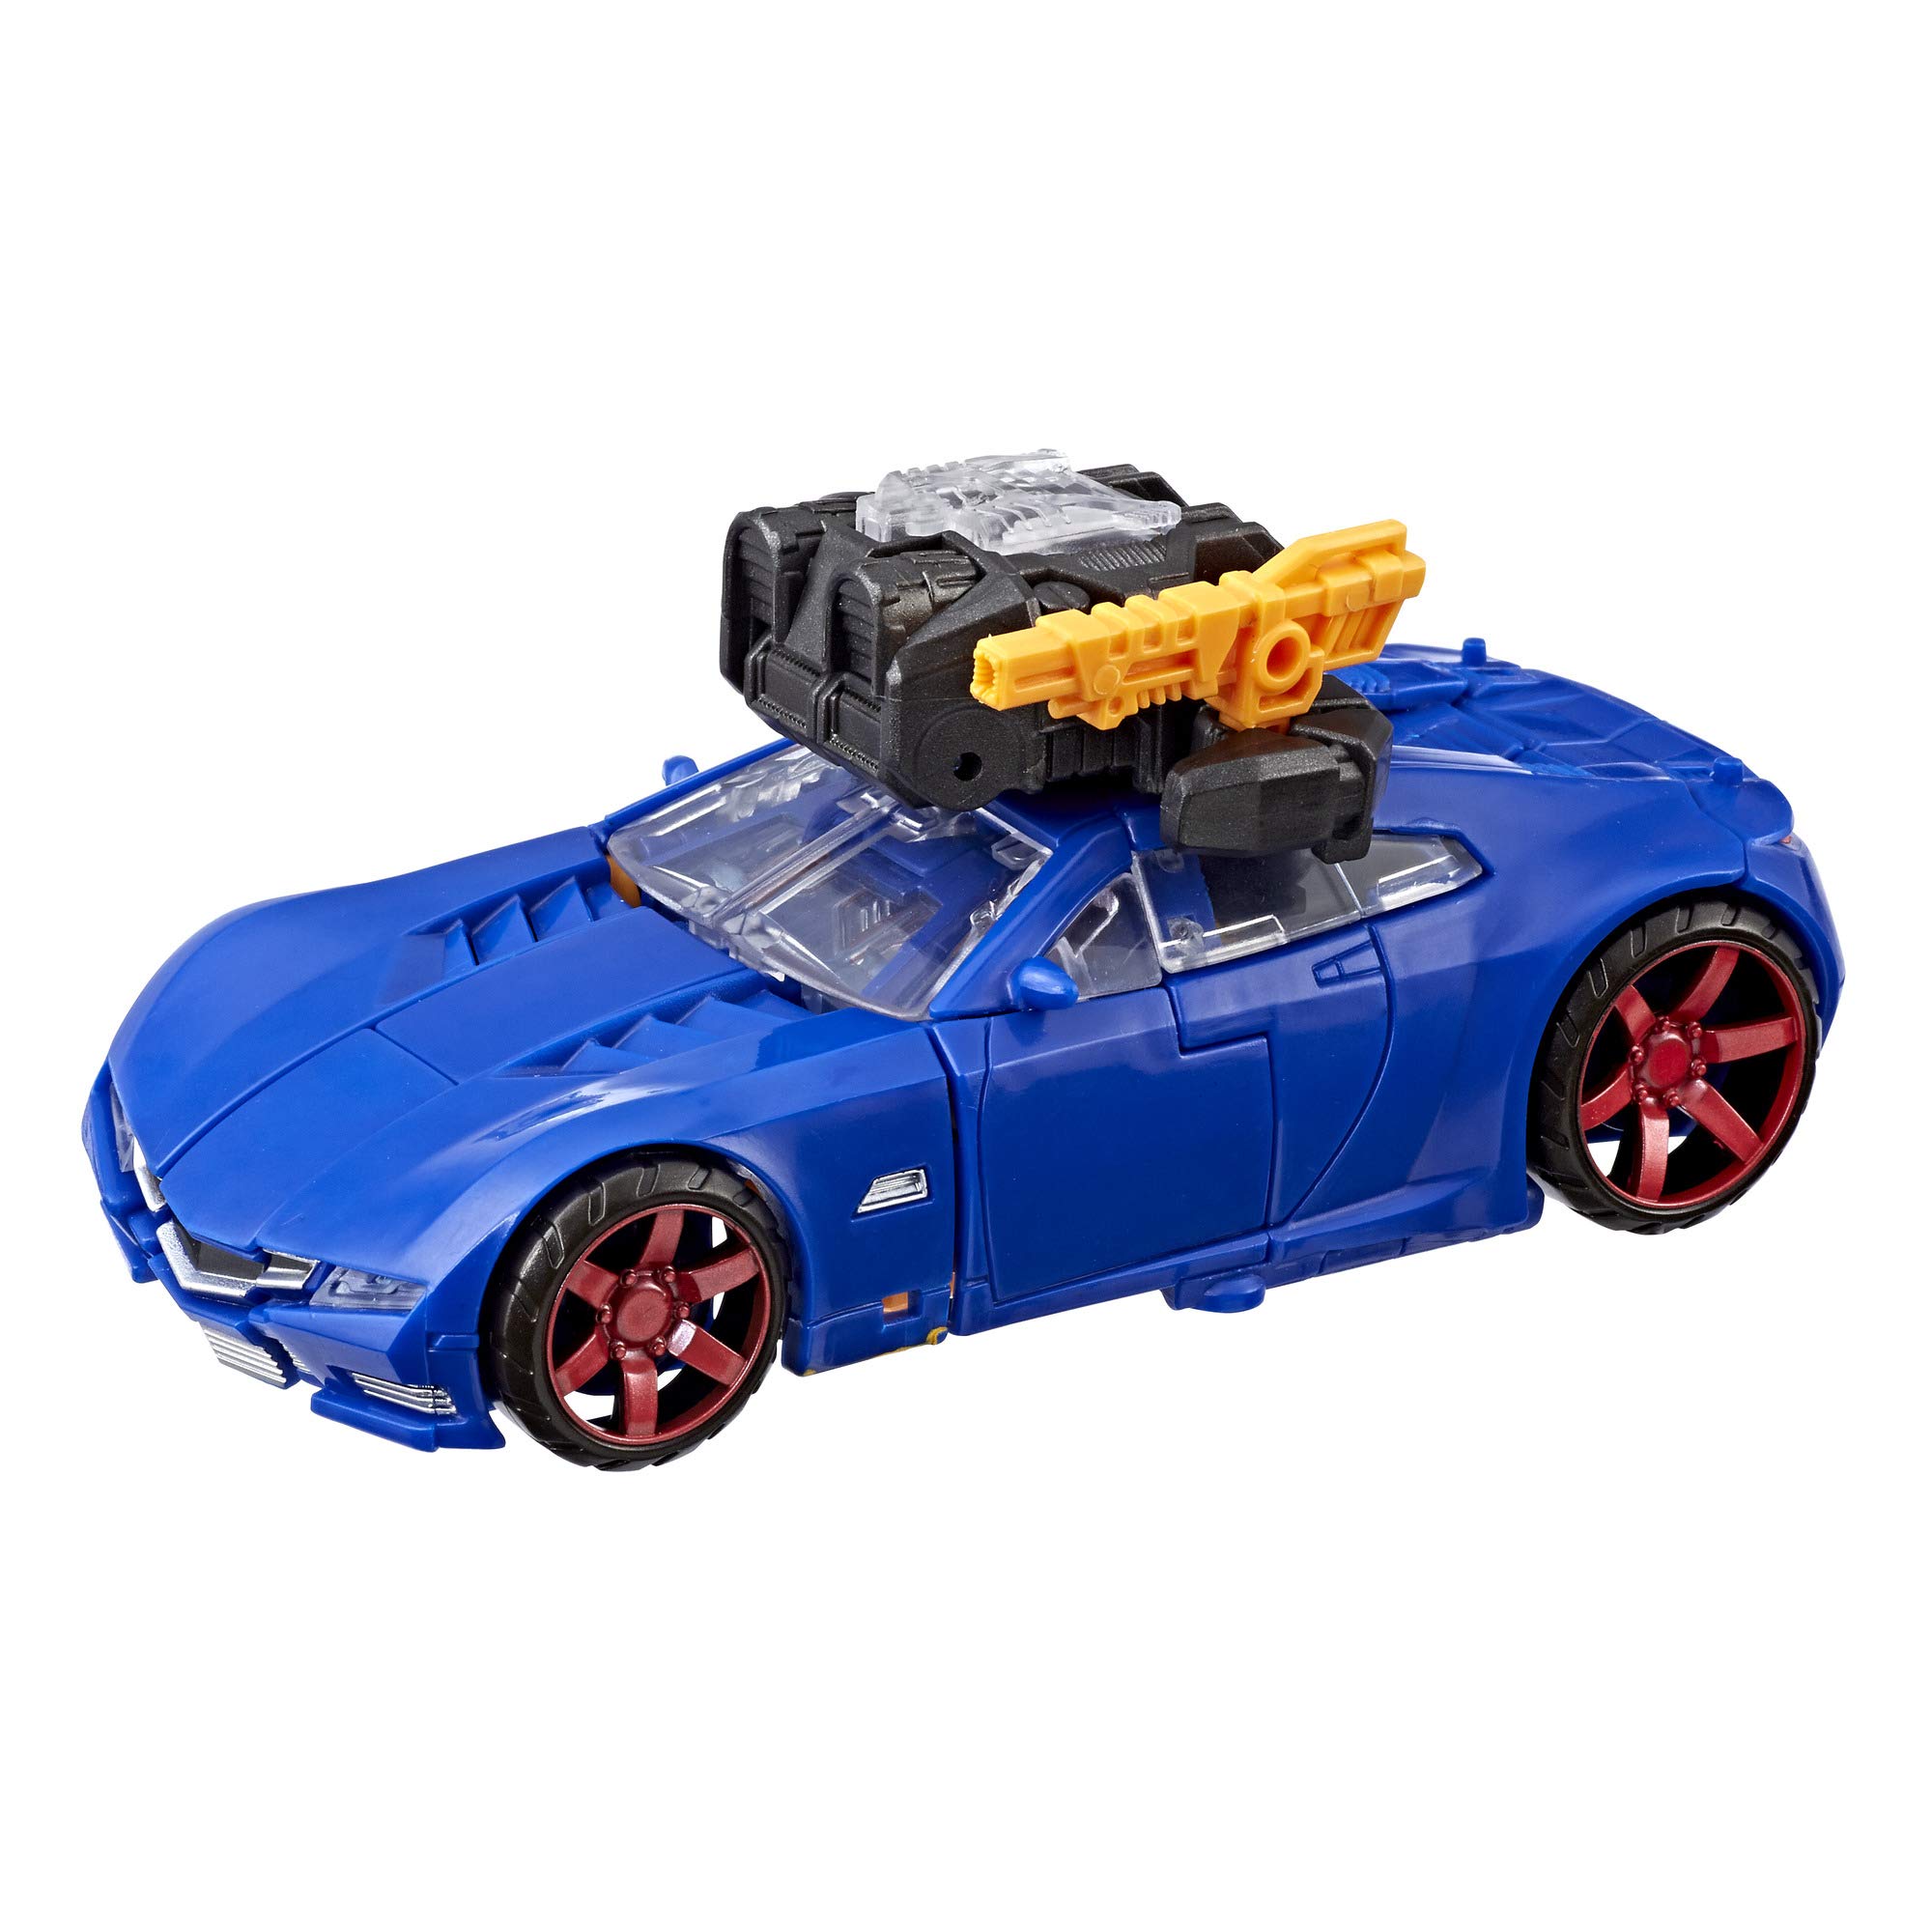 Transformers Power of the Primes Punch-Counterpunch and Prima Prime(Amazon Exclusive)